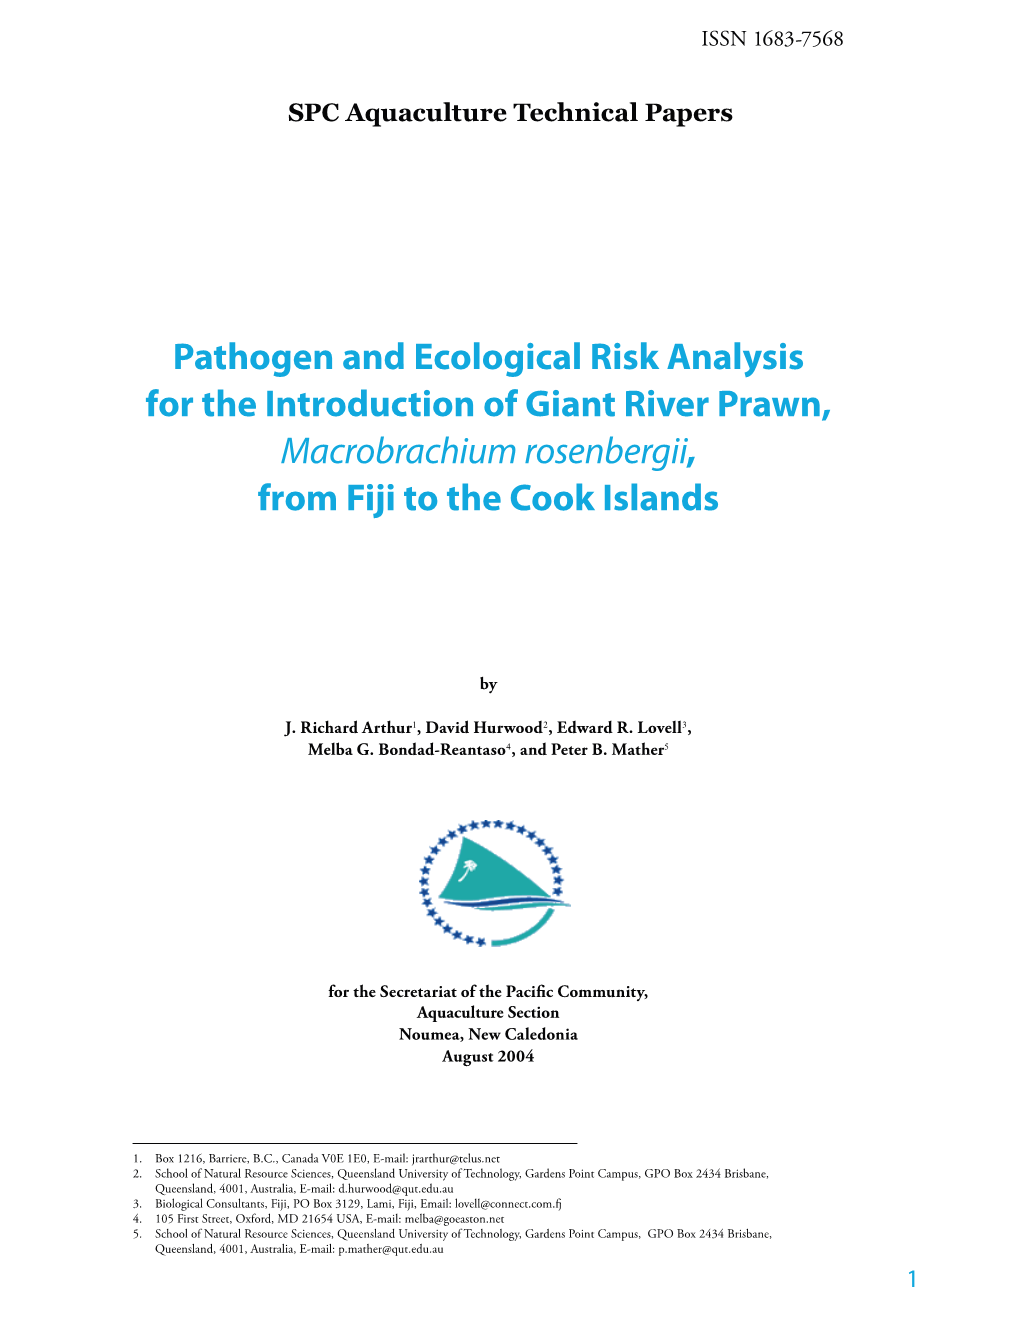 Pathogen and Ecological Risk Analysis for the Introduction of Giant River Prawn, Macrobrachium Rosenbergii , from Fiji to the Cook Islands